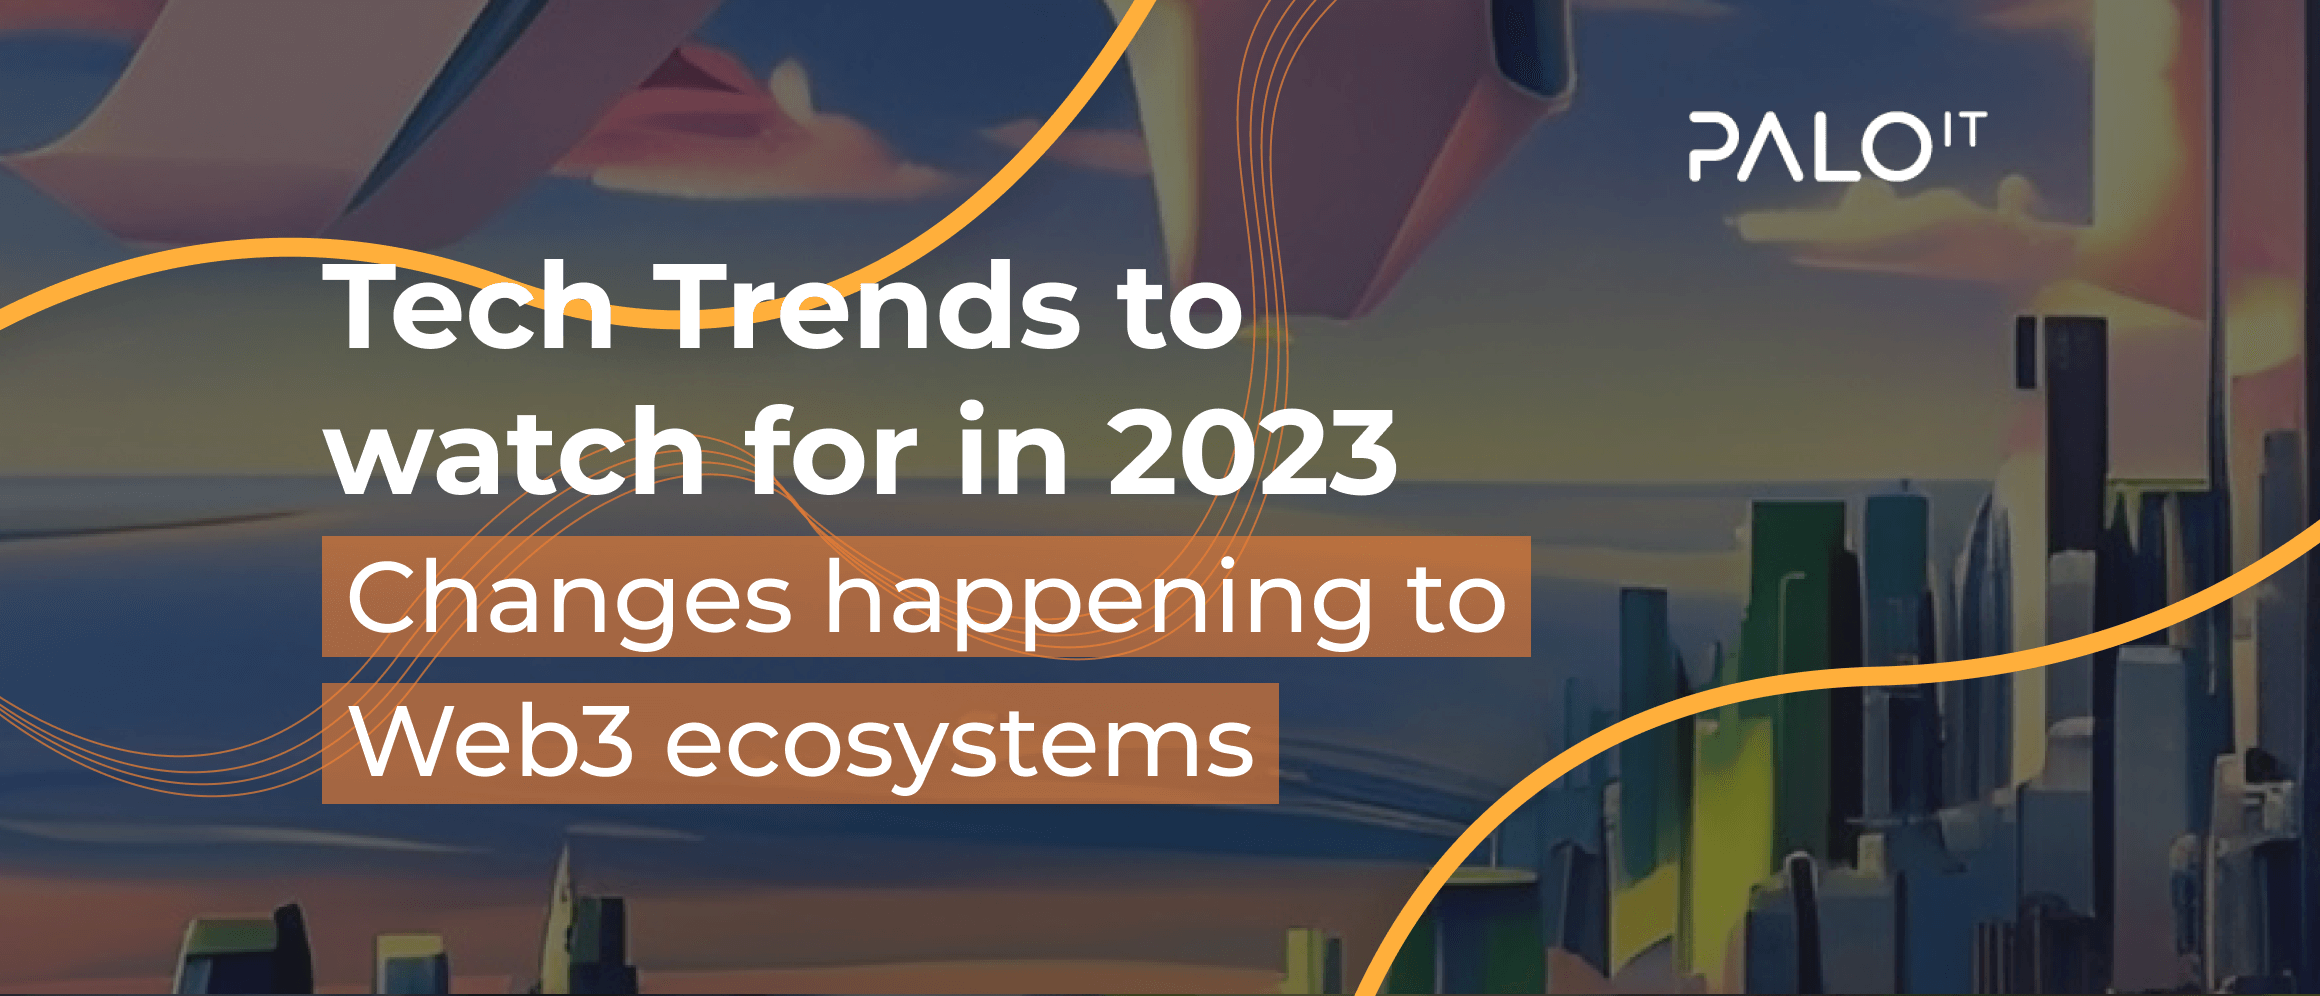 Tech Trends to watch for in 2023: Changes happening to Web3 ecosystems